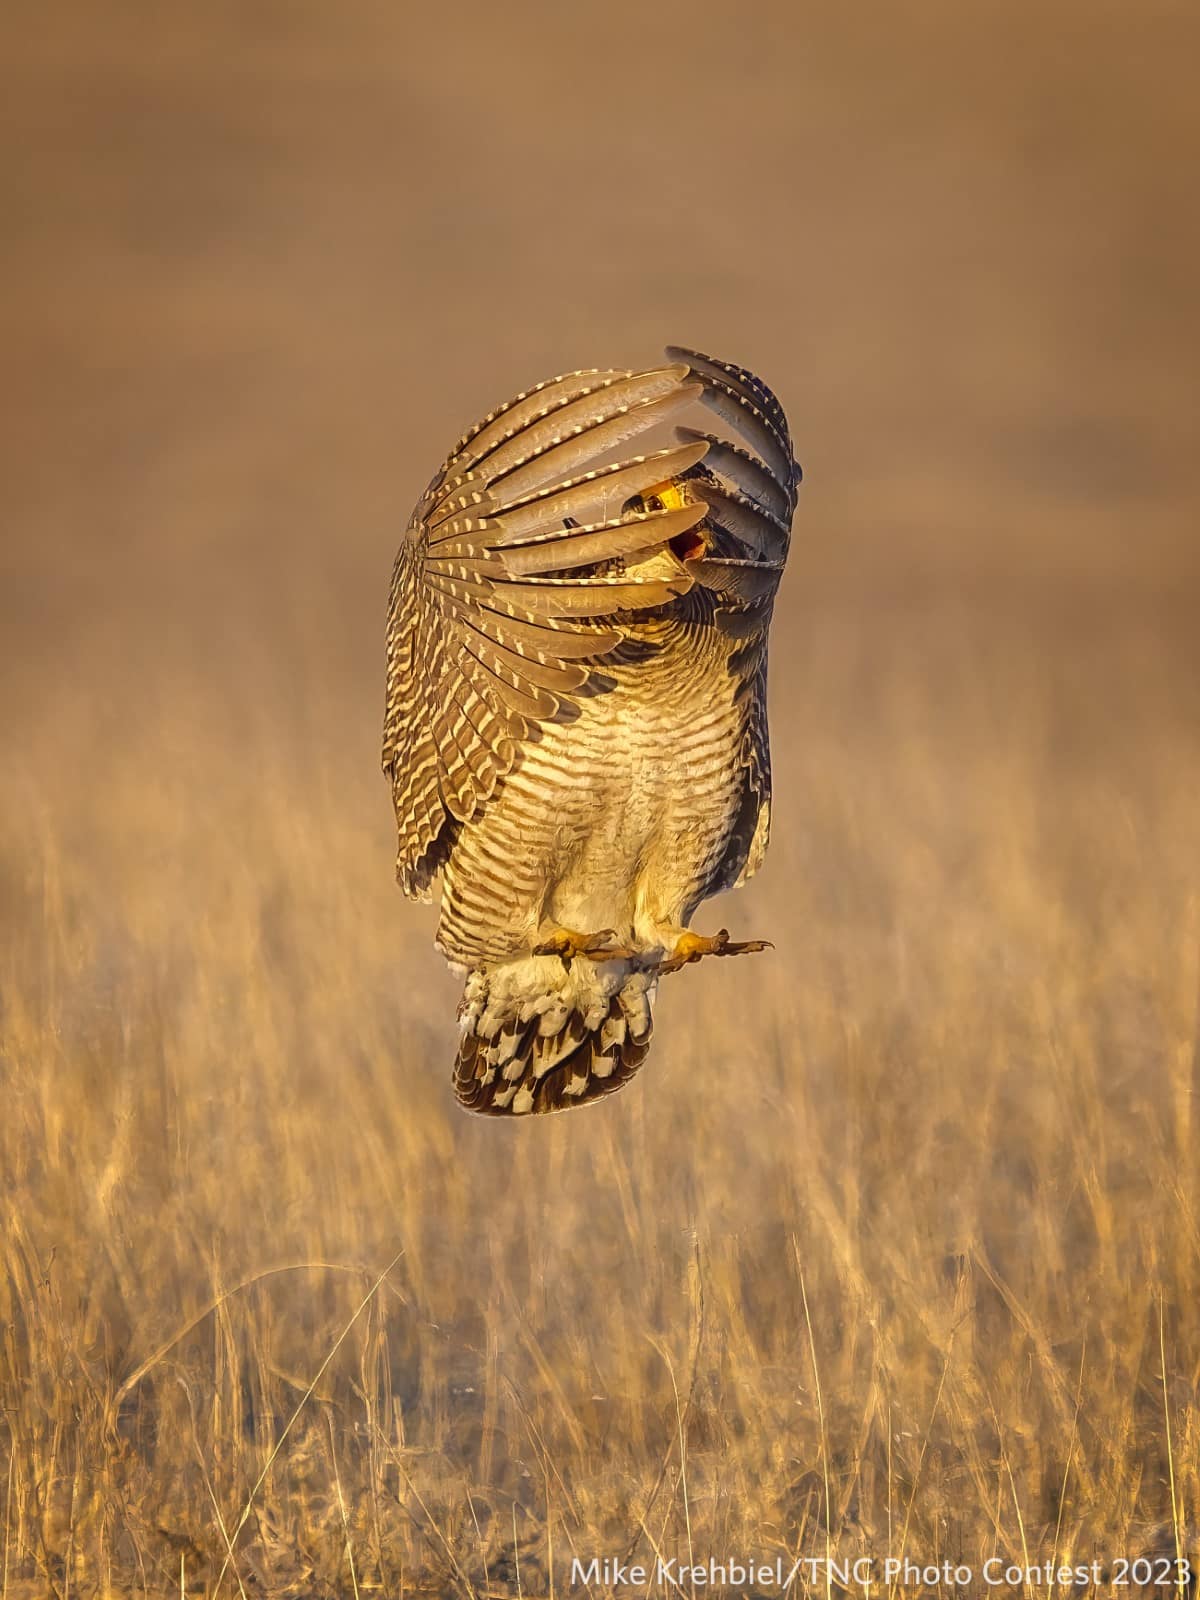 Lesser prairie chicken in a field with wings over its face